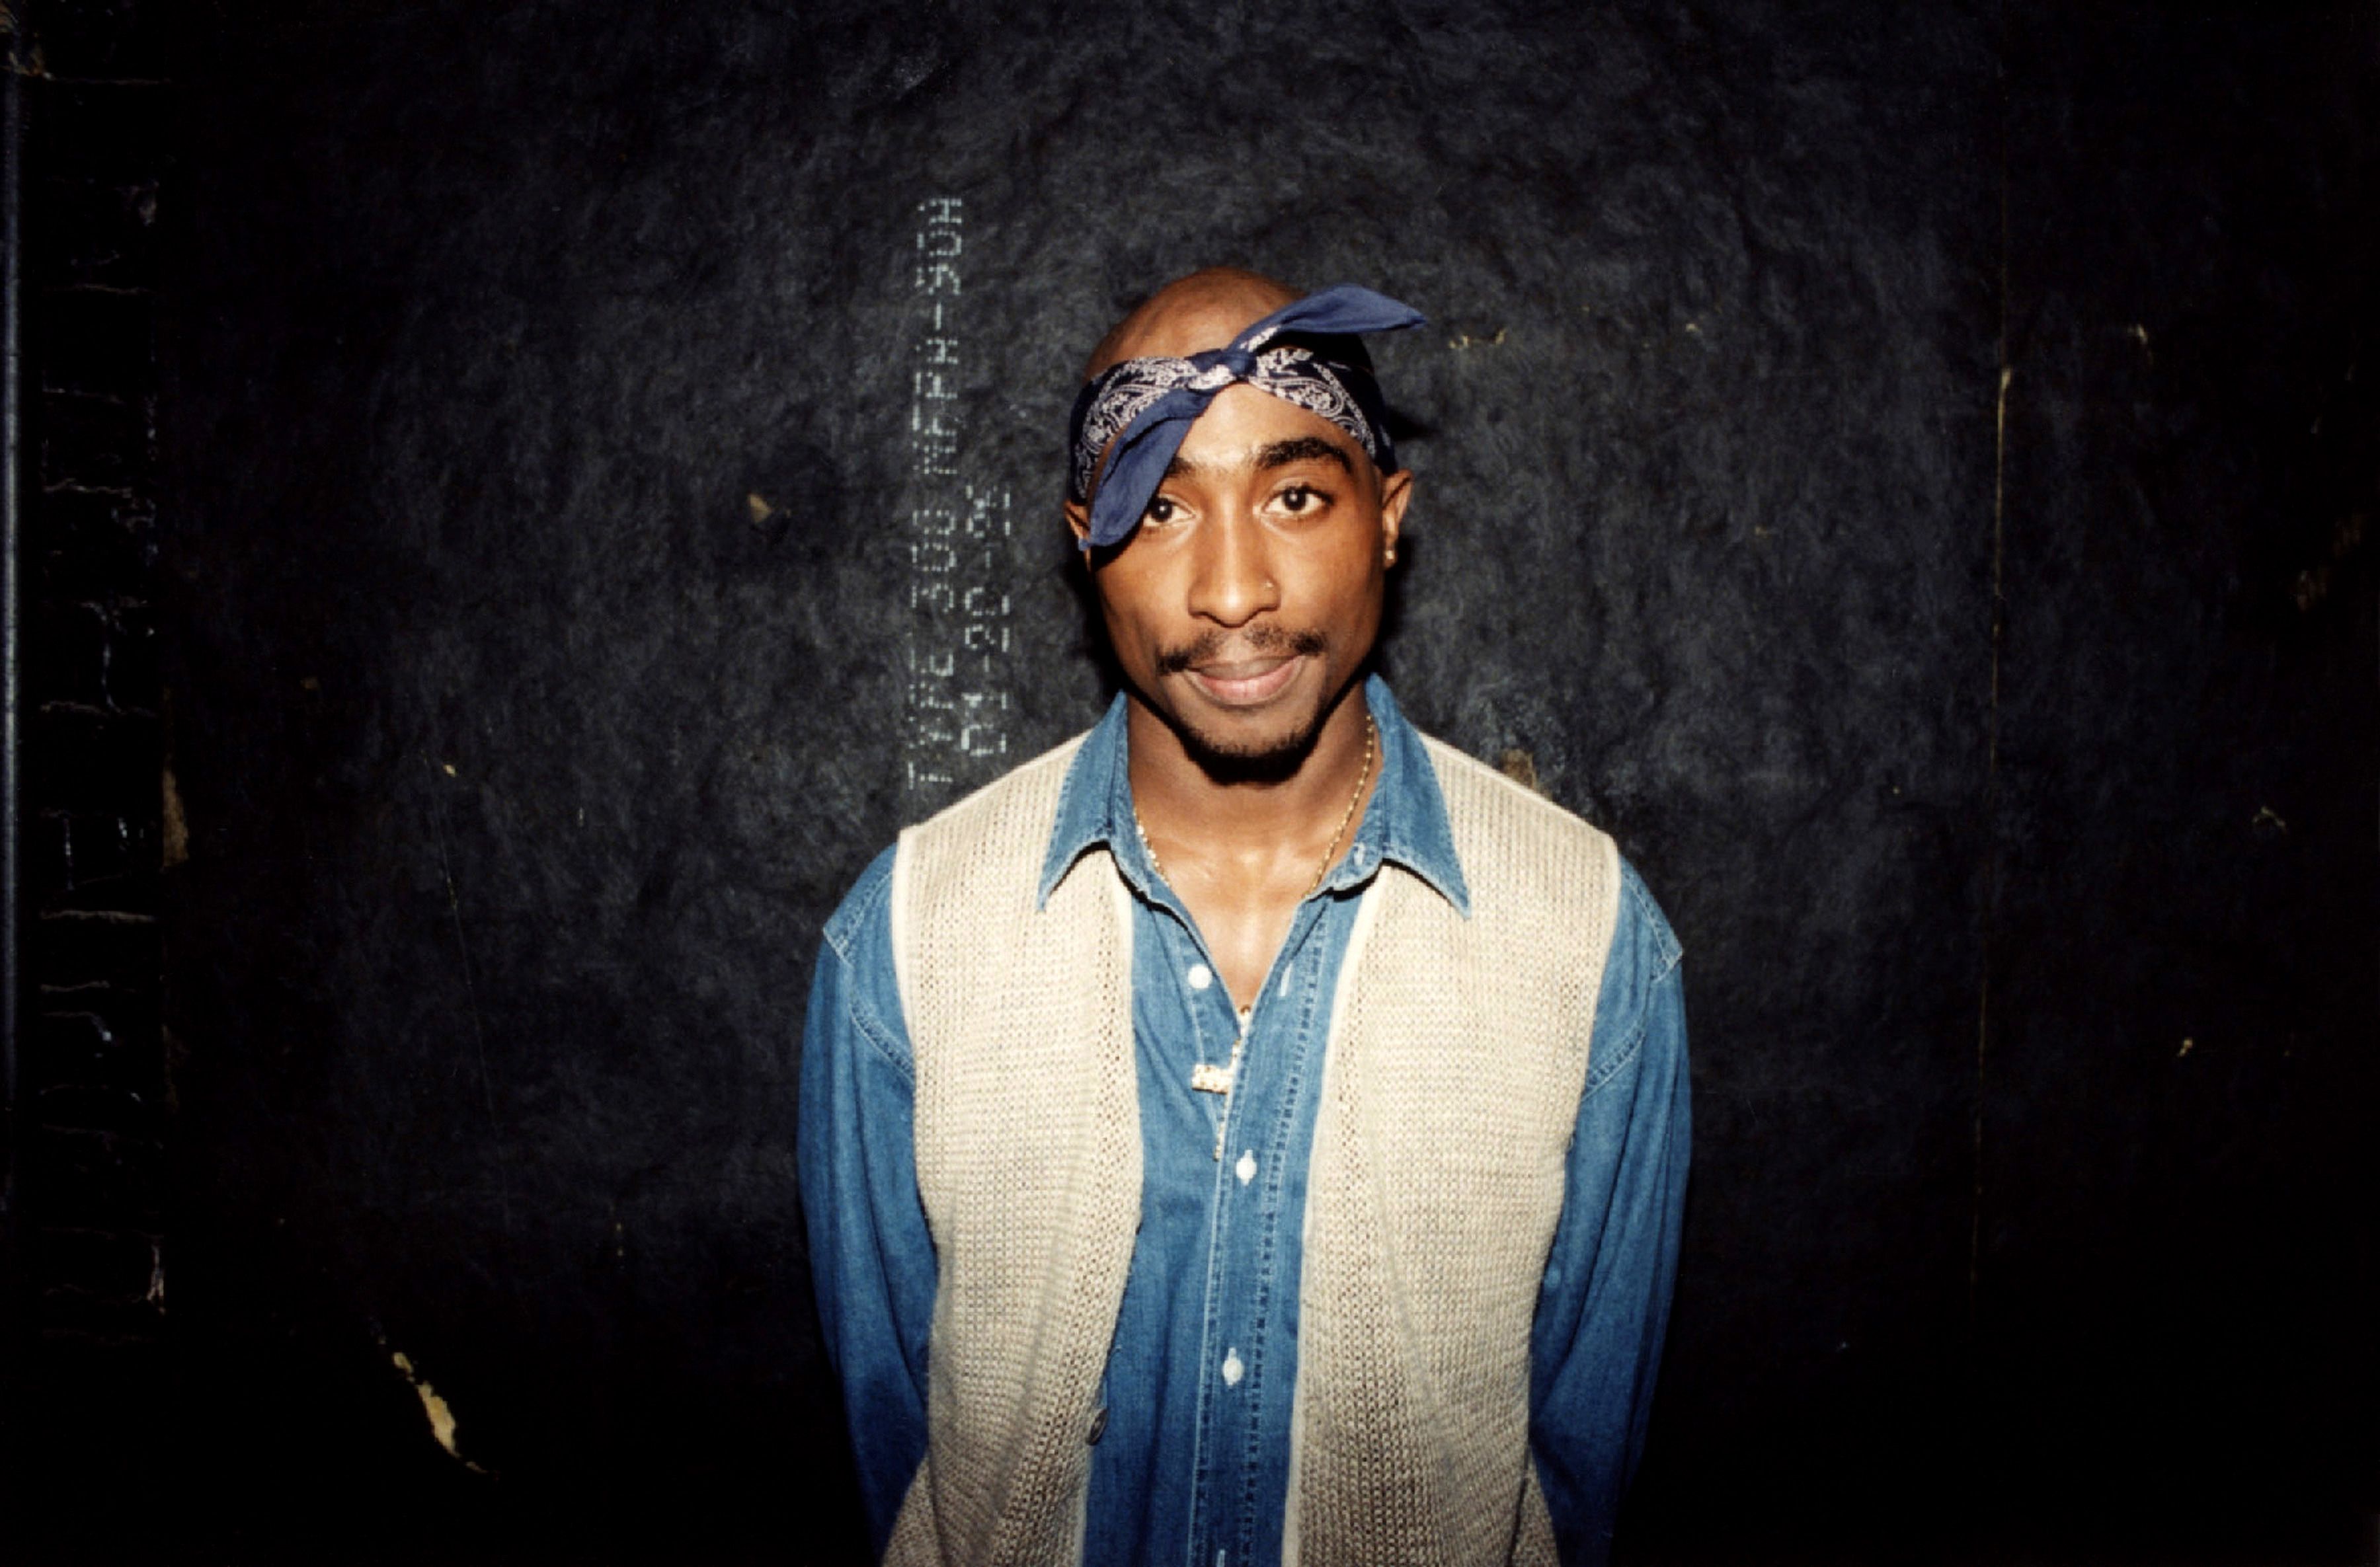 Rapper Tupac Shakur poses for photos backstage after his performance at the Regal Theater on March 01, 1994 | Photo: Getty Images